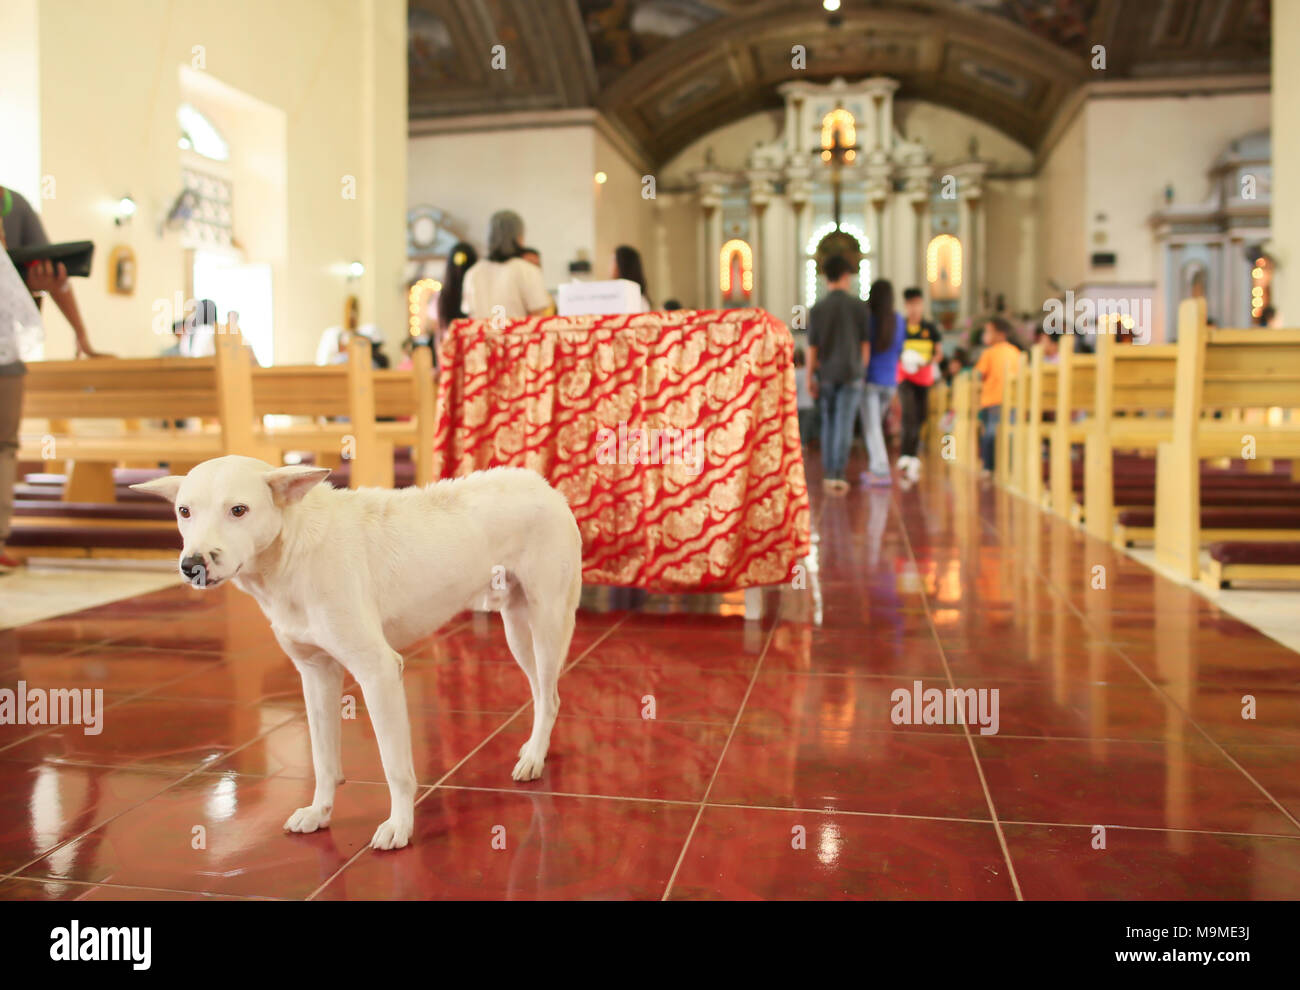 Parishioners in the Catholic Church in the Philippines after the prayer. Inside, the dog accidentally entered the temple. Stock Photo